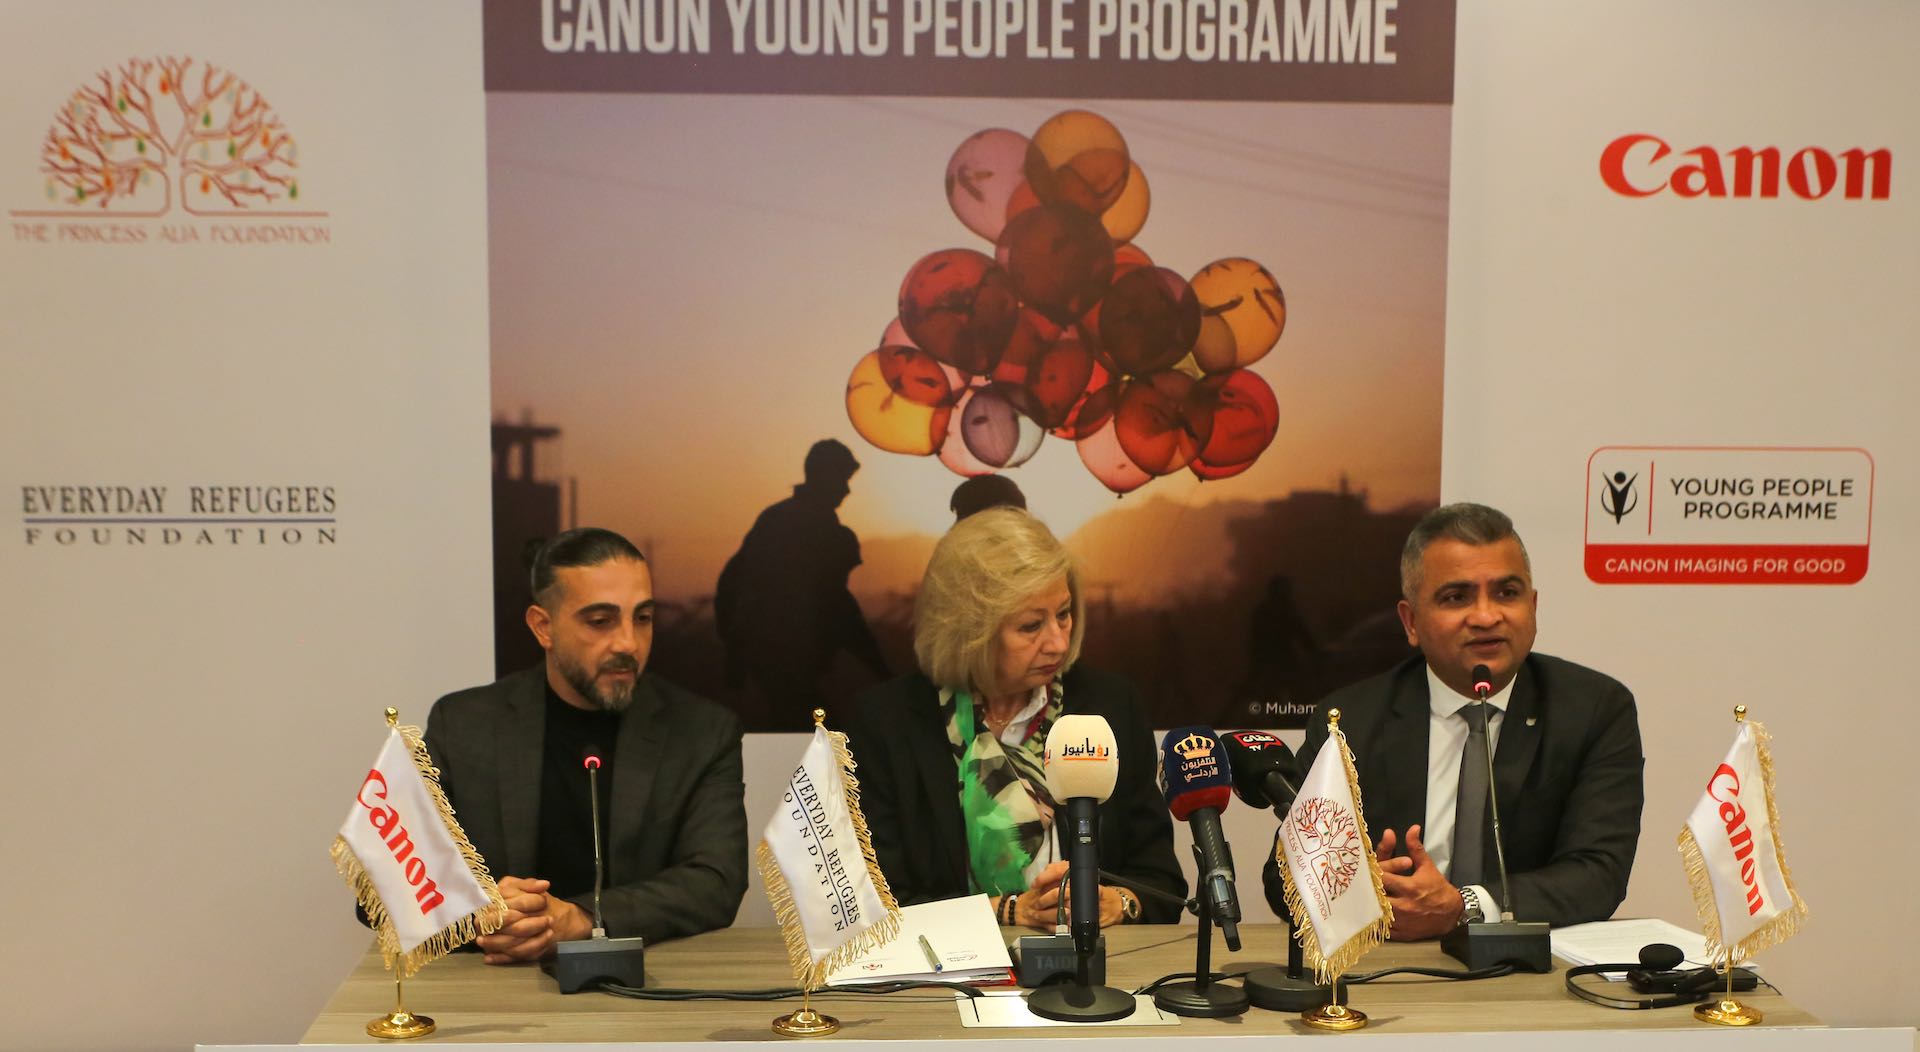 Canon unveils Young People Programme in Jordan to empower youth